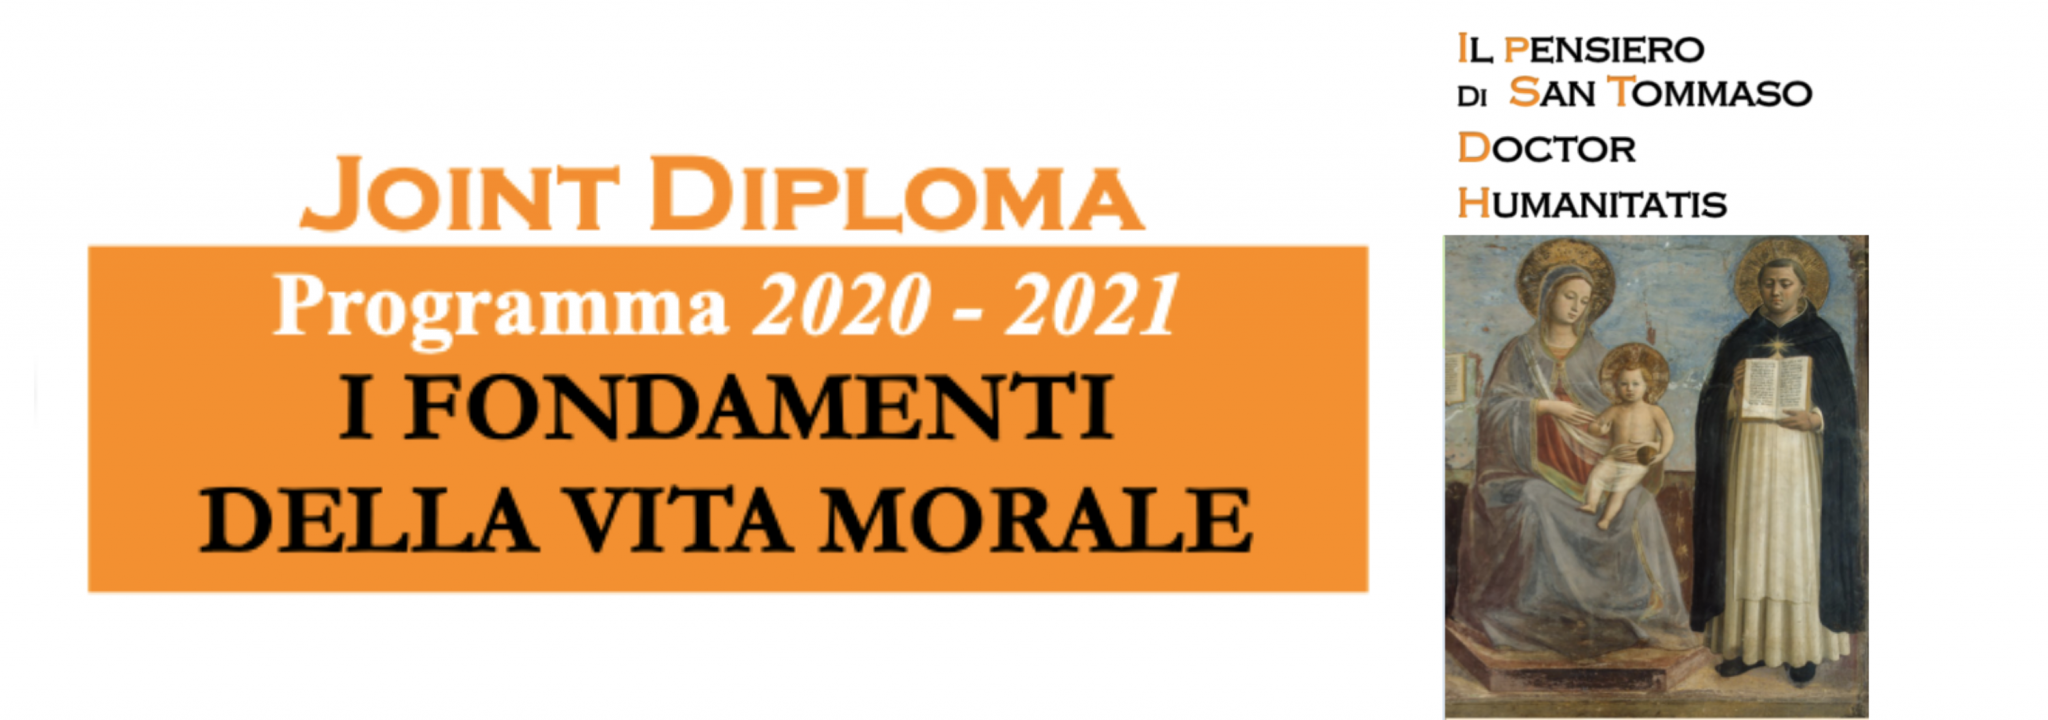 banner-joint-diploma-20-21